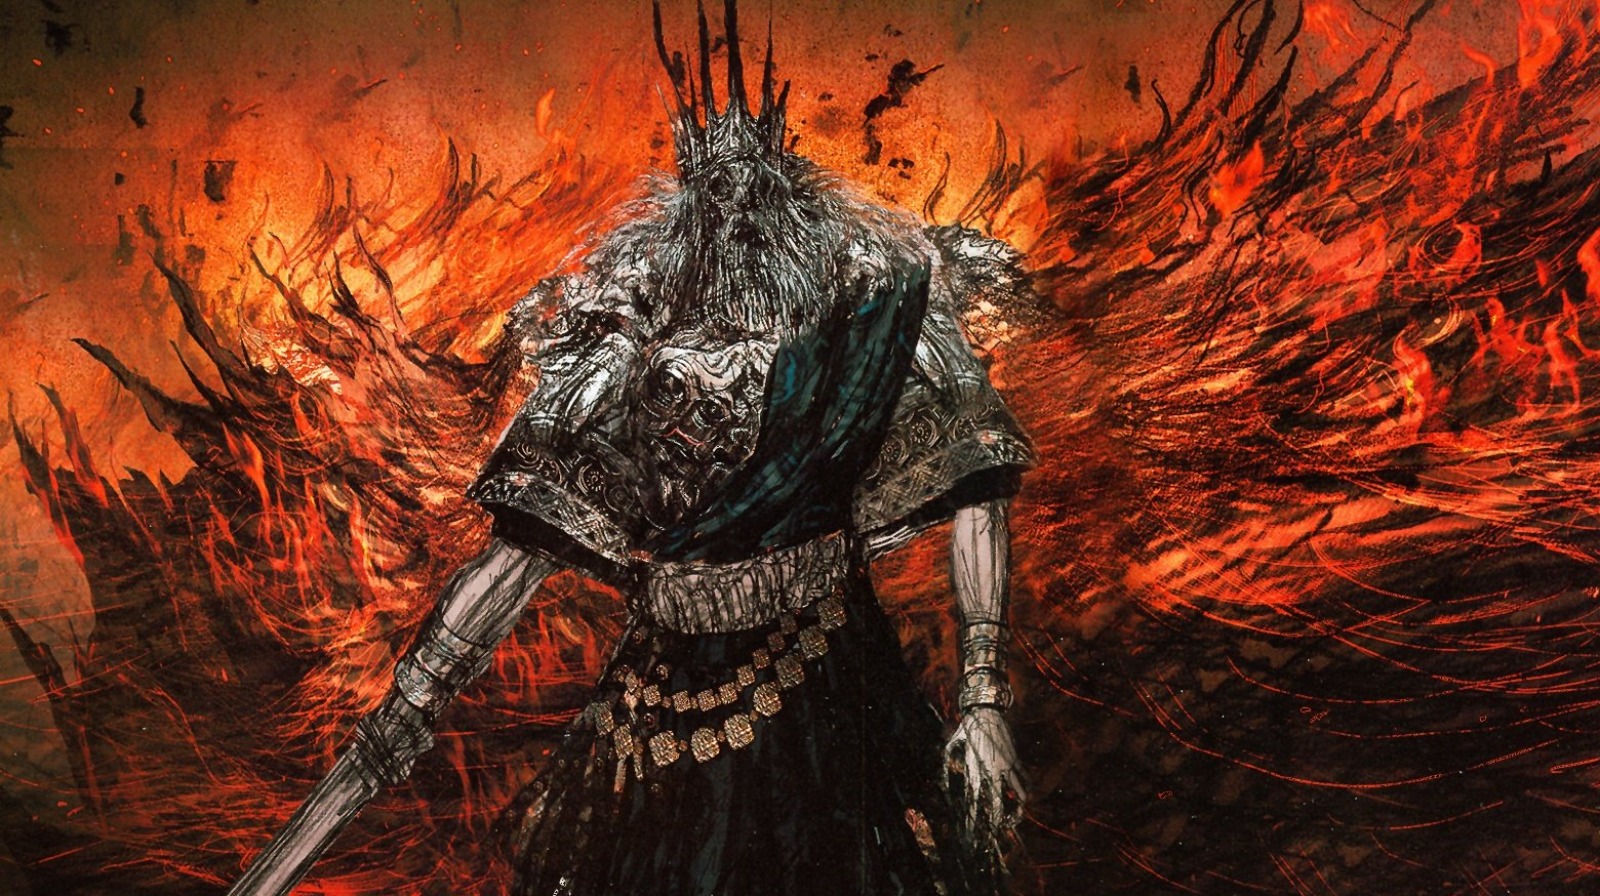 The Mythology In The Dark Souls Series Explained